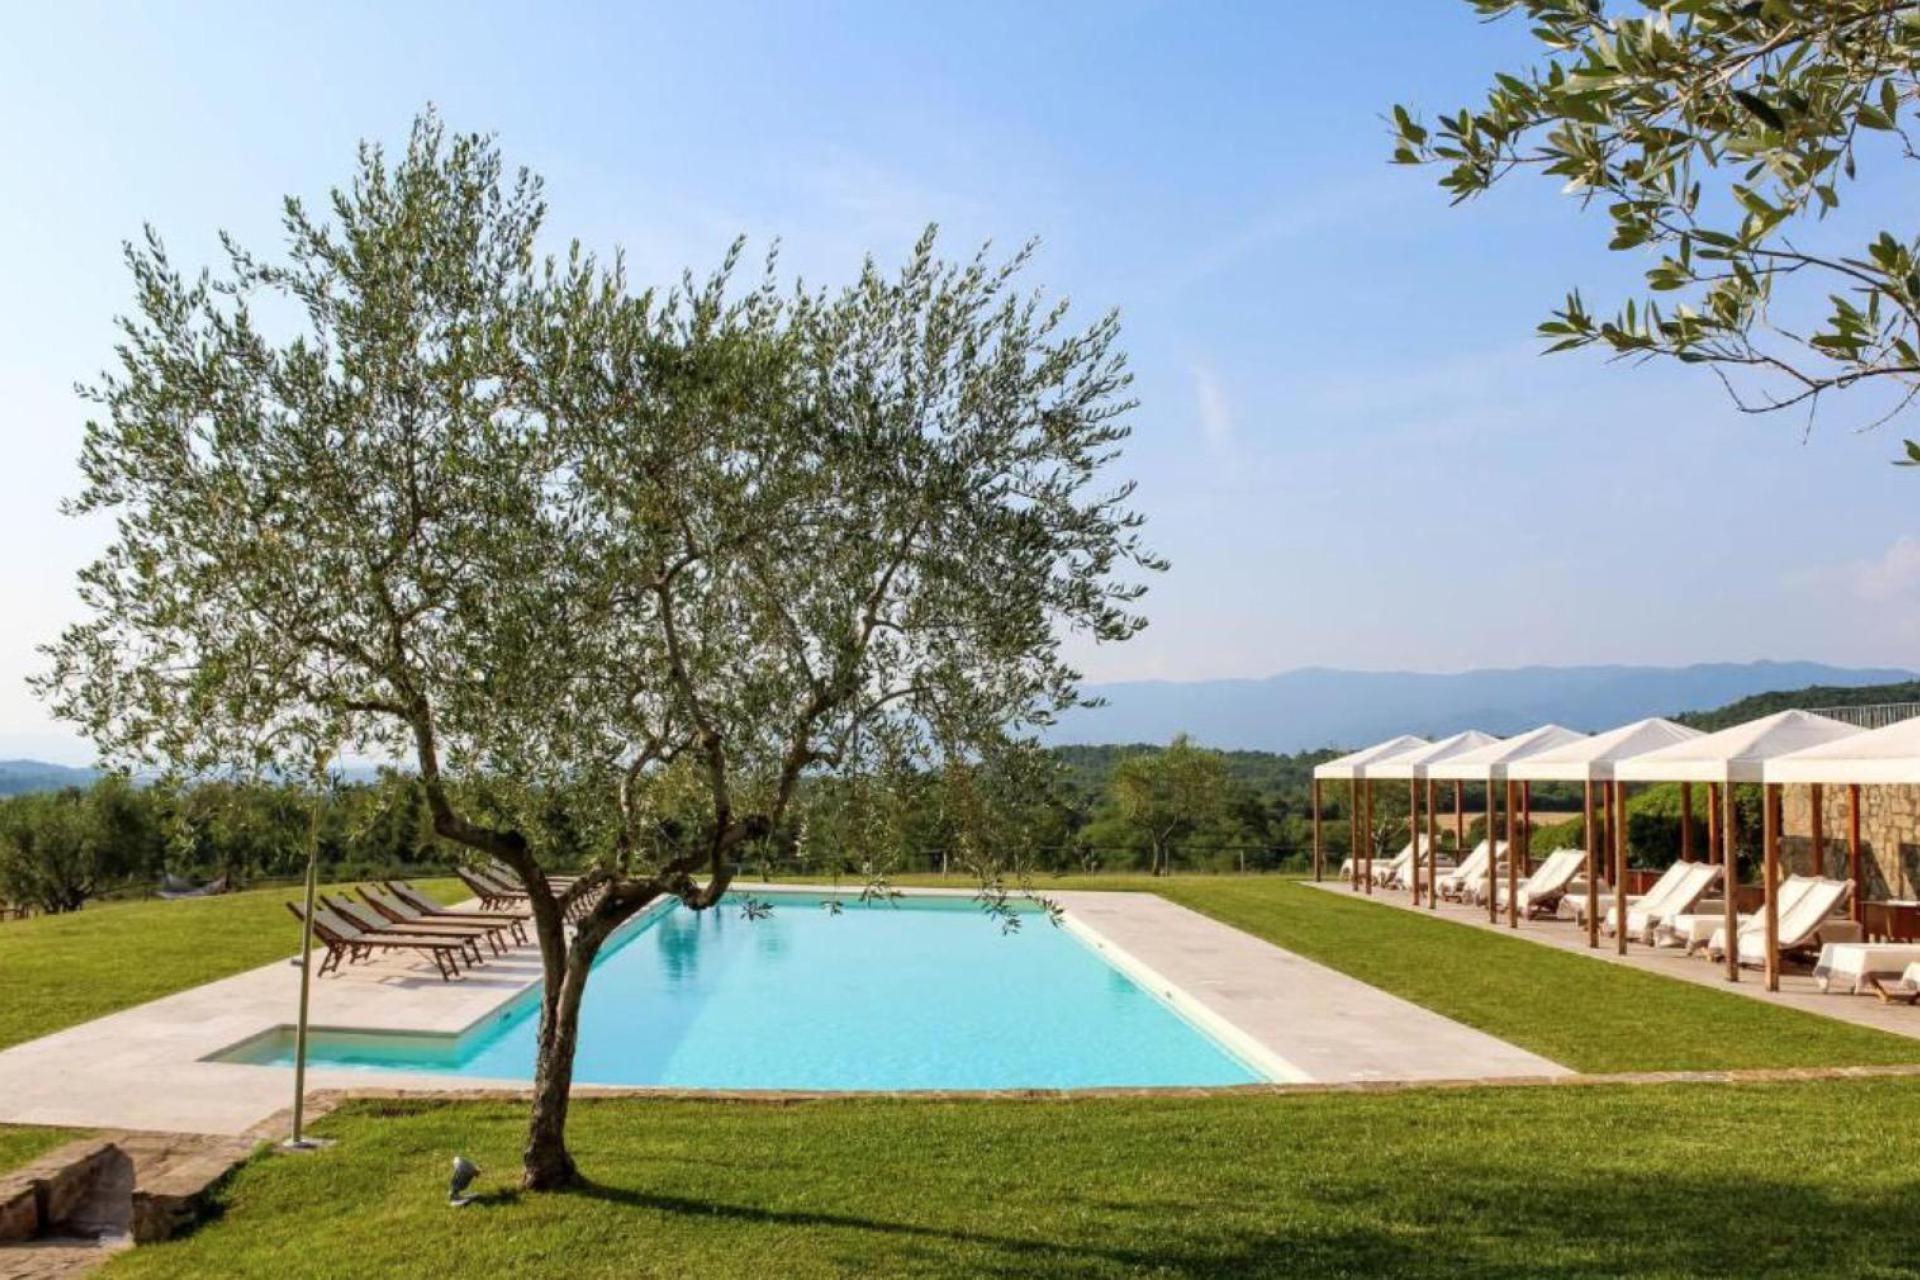 1. Agriturismo with 2 large swimming pools